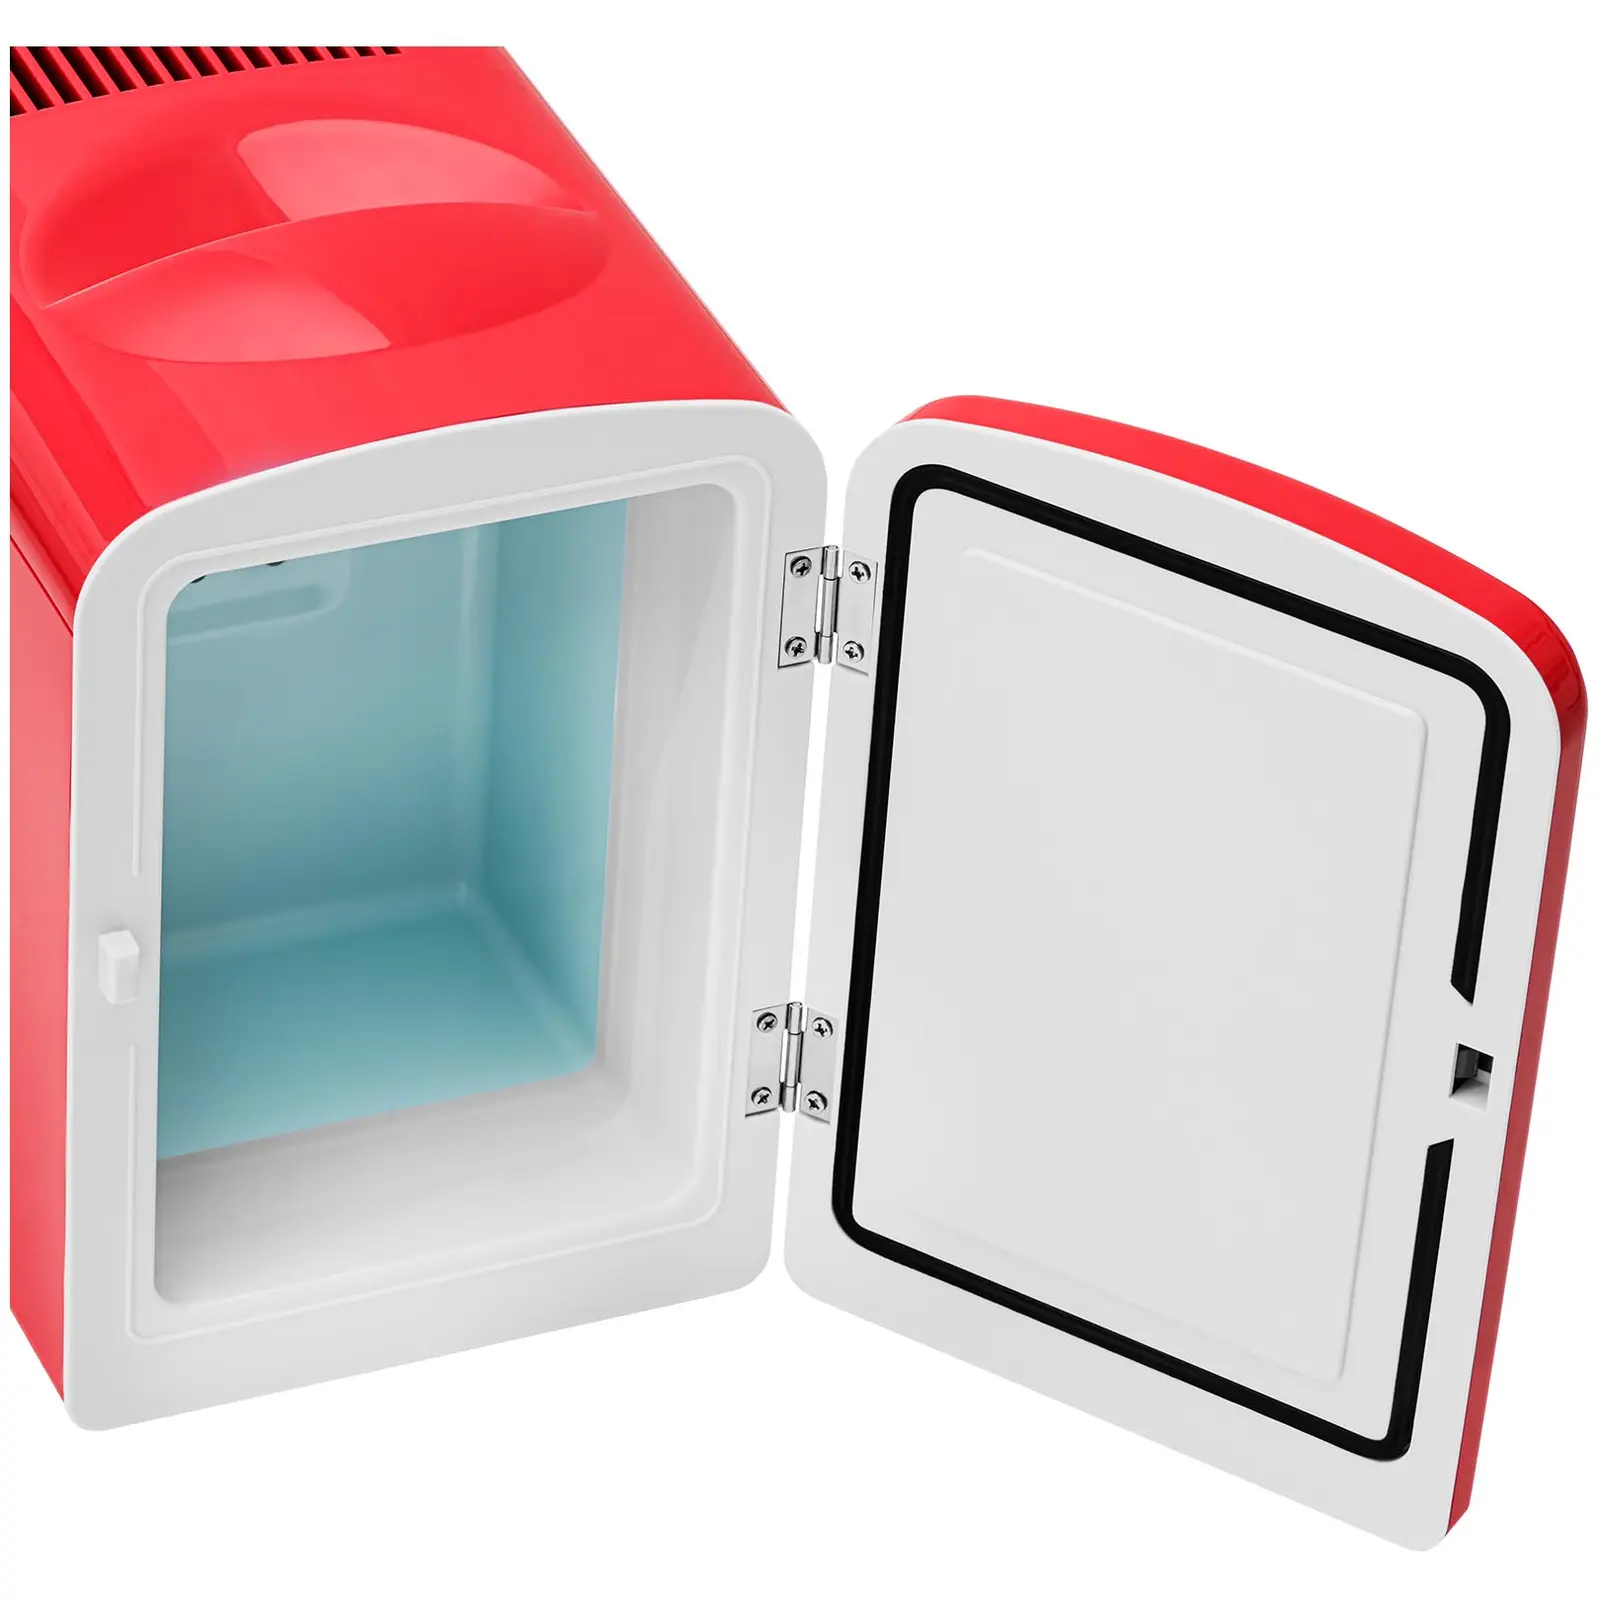 Mini Refrigerator 12 V / 230 V - 2-in-1 appliance with keep-warm function - 4 L - Red